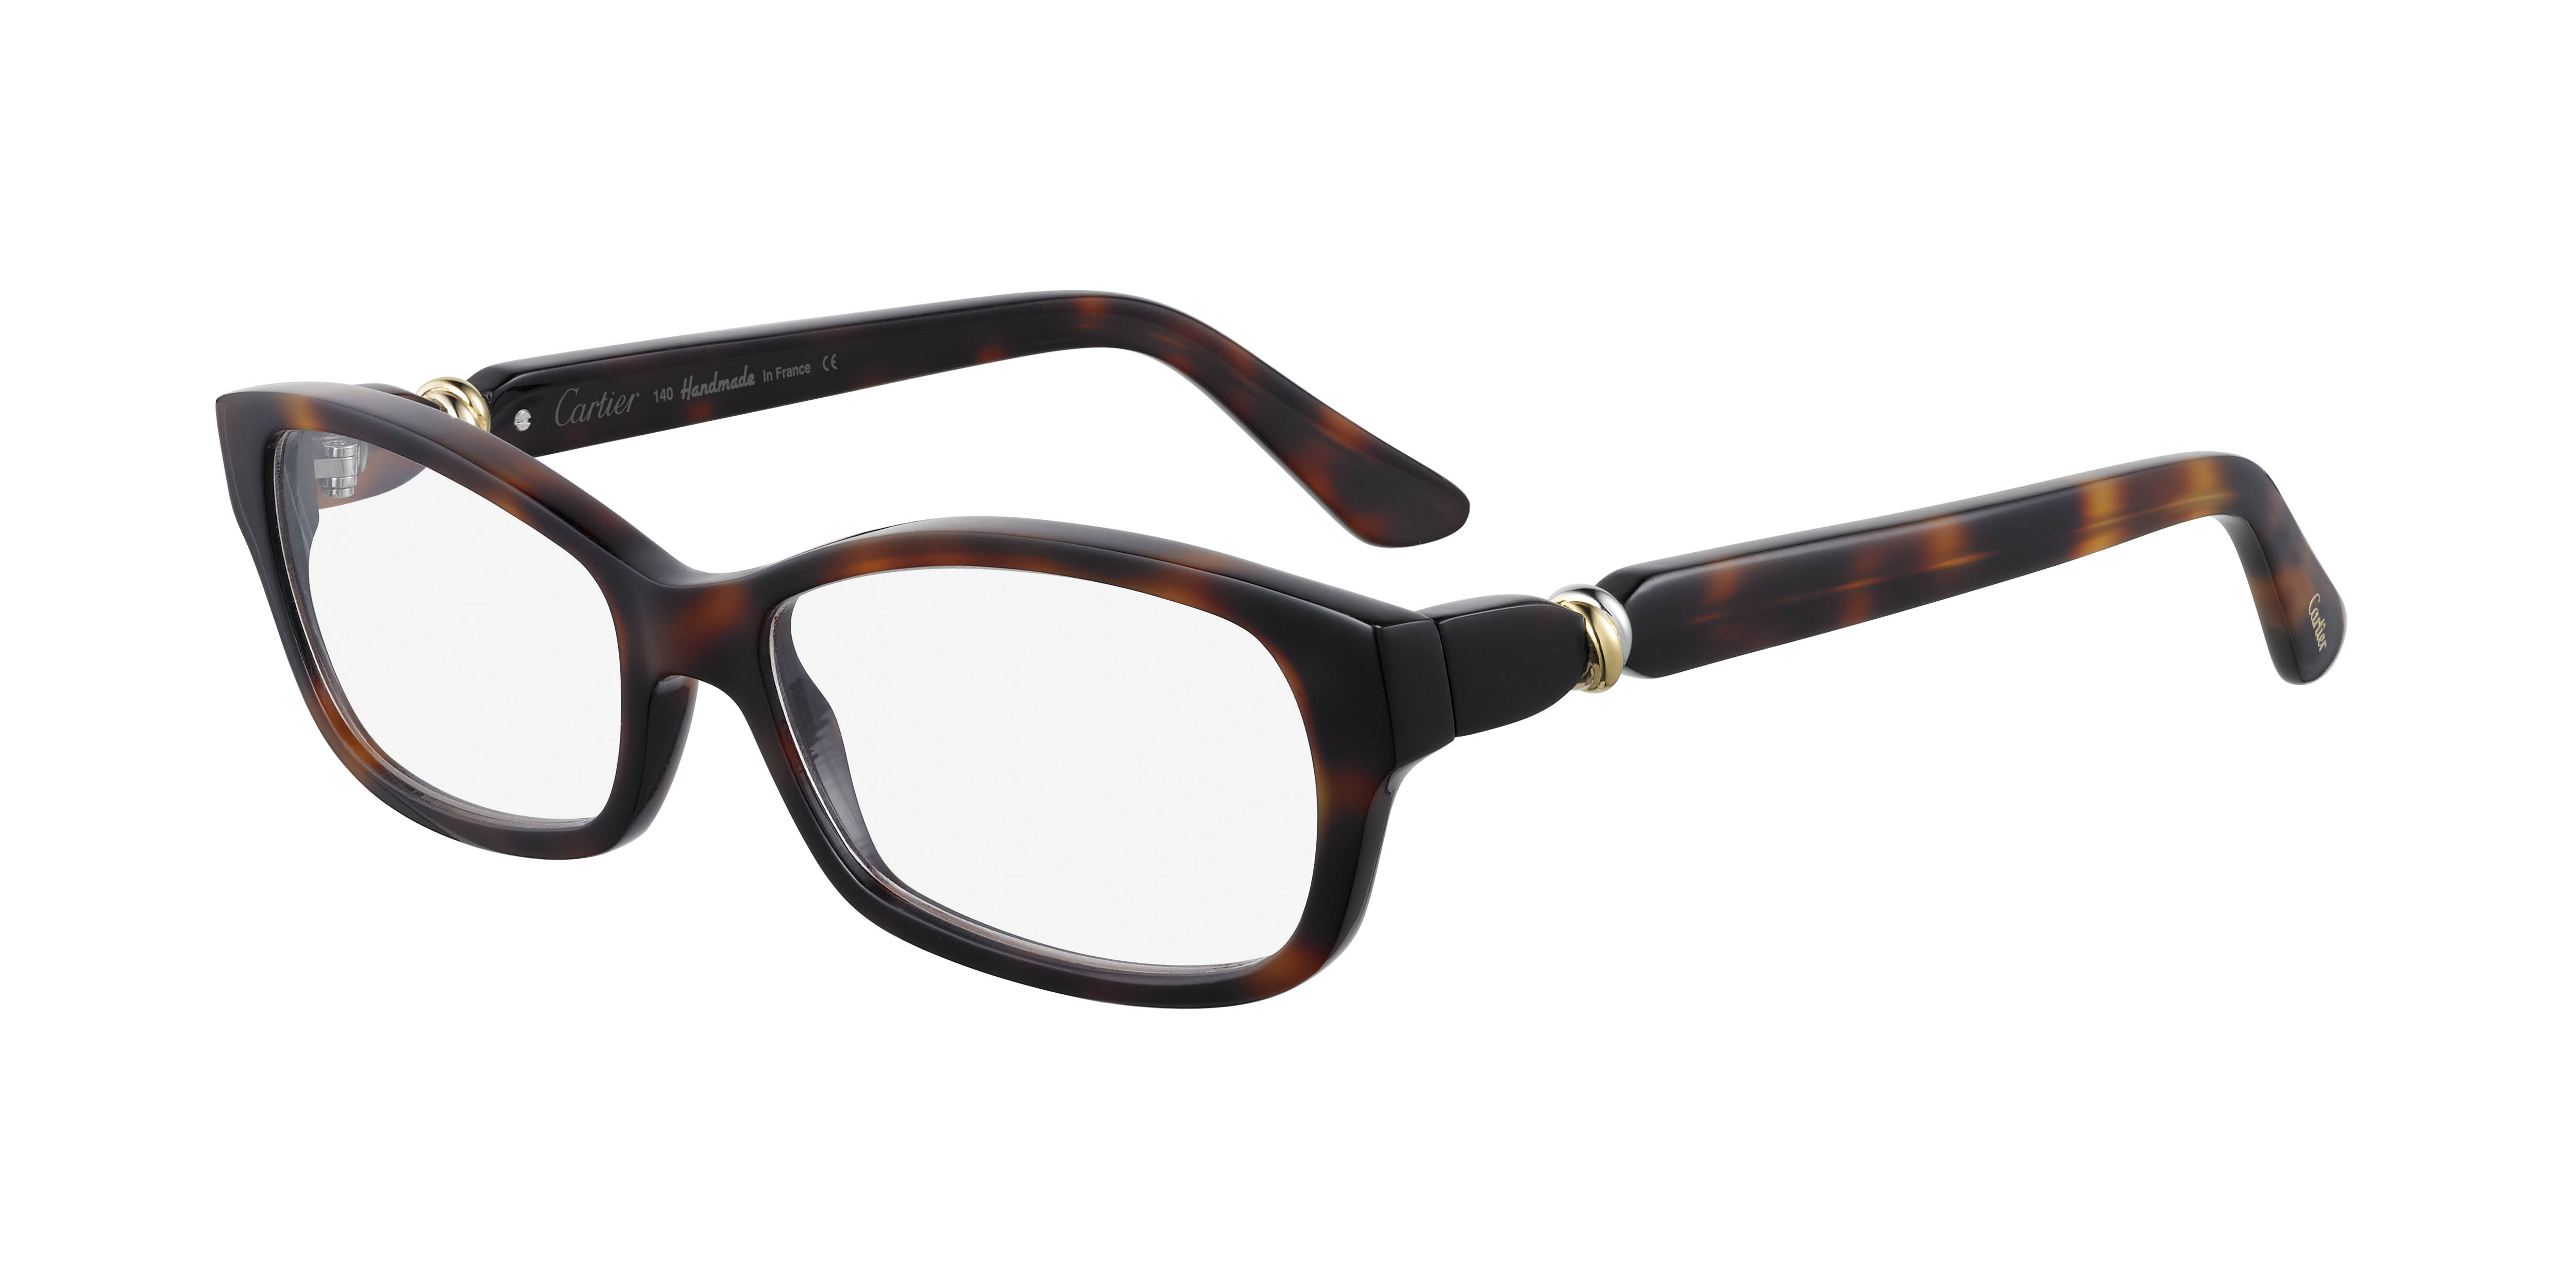 Cartier Red Wood Glasses with Gold C Decor and Black Lens – All Eyes On Me